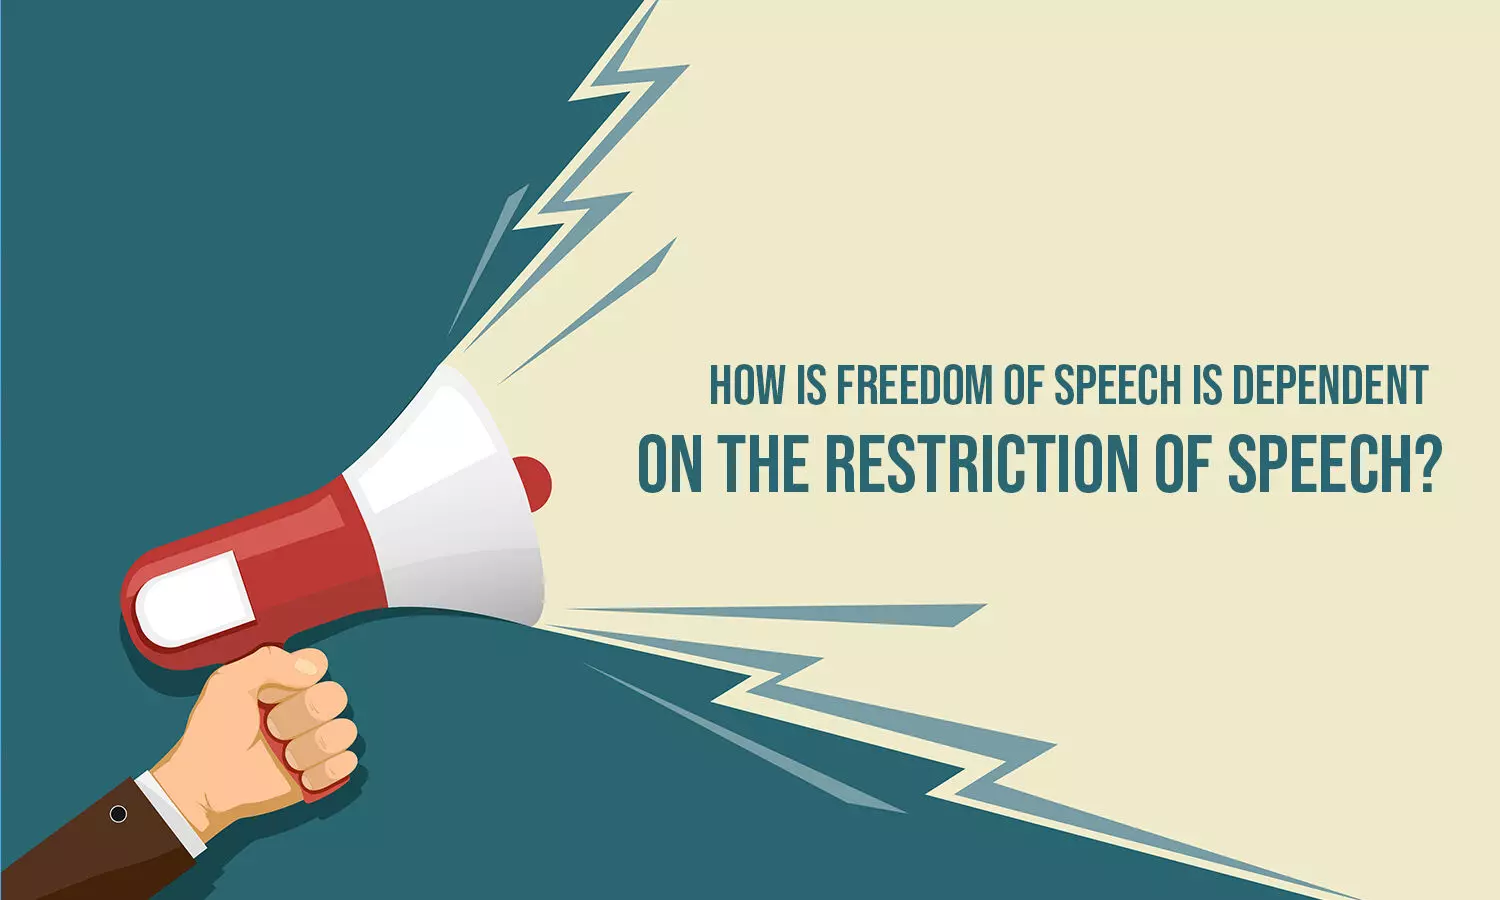 How is Freedom of Speech dependent on the Restriction of Speech?